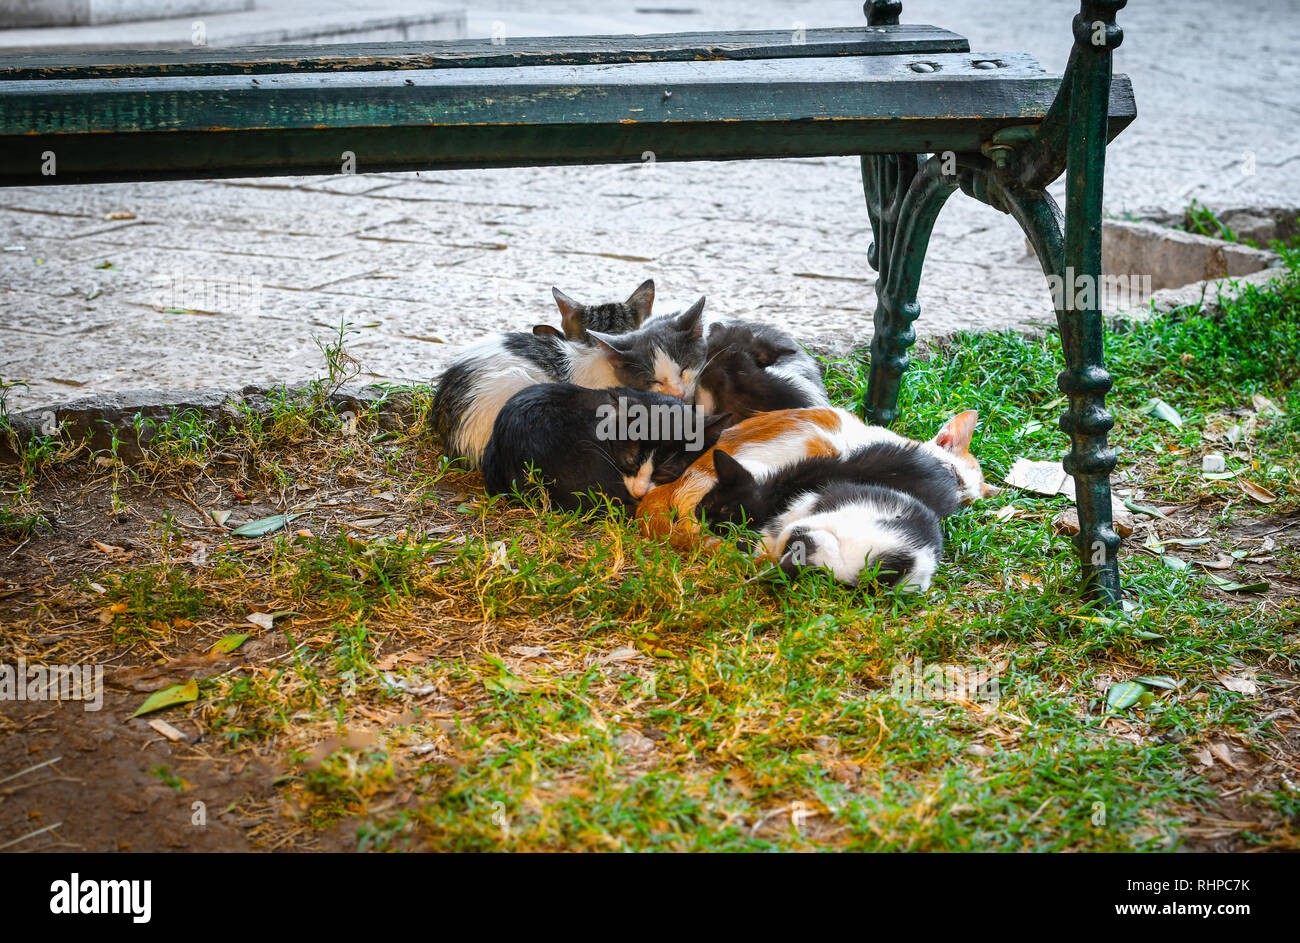 A group of sick kittens huddle together for warmth under a bench in a small park in the old town center of Kotor, Montenegro, The City of Cats. Stock Photo